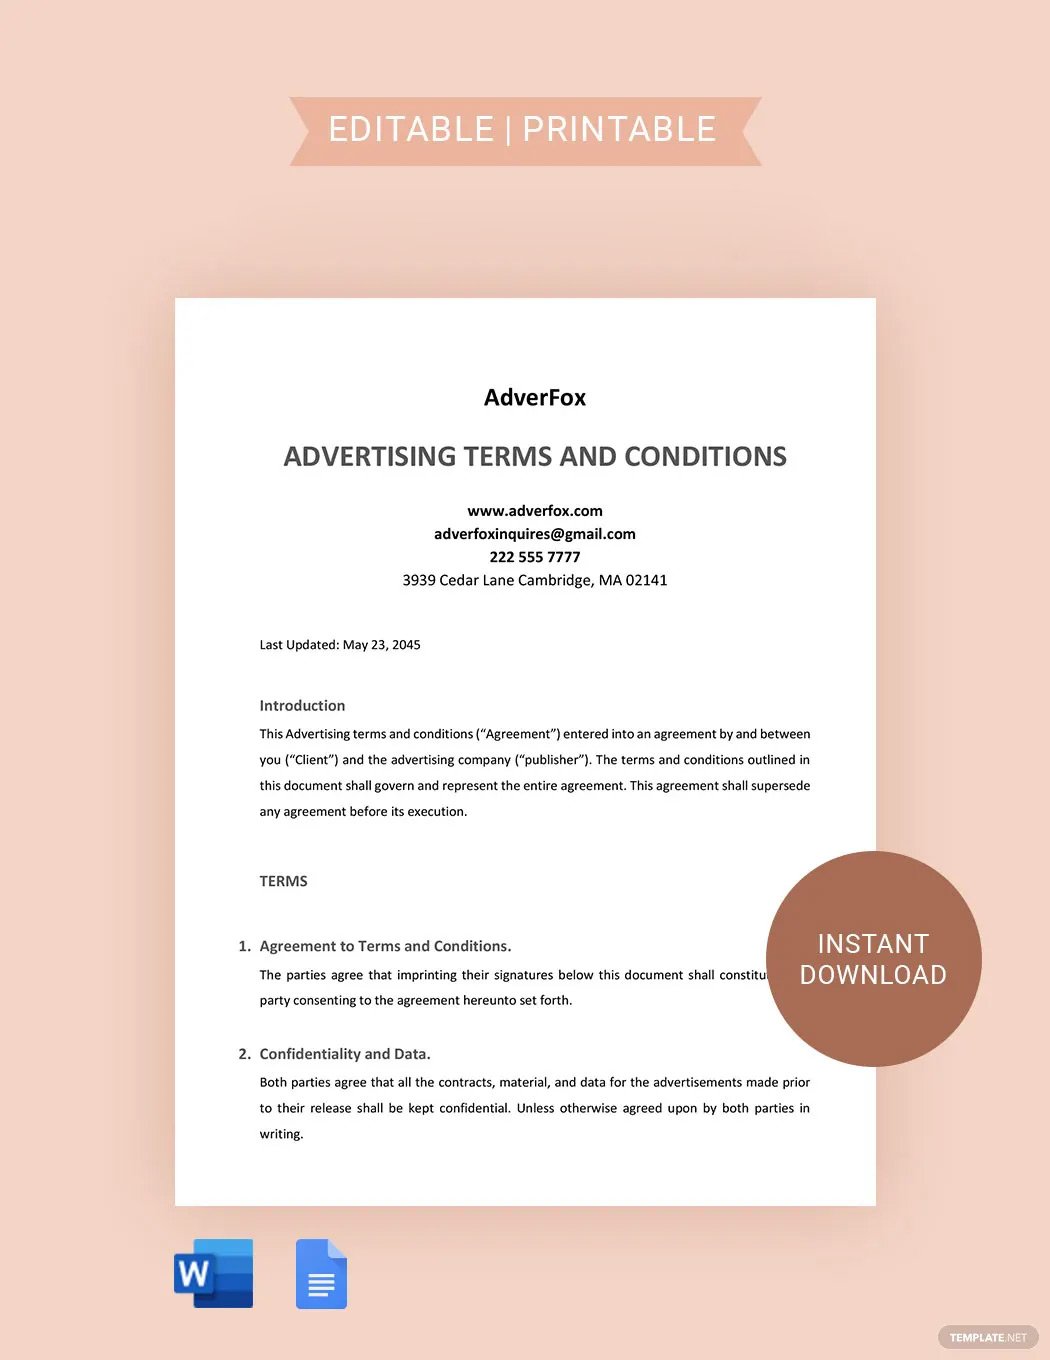 Advertsising Terms and Conditions Template in Word, Google Docs